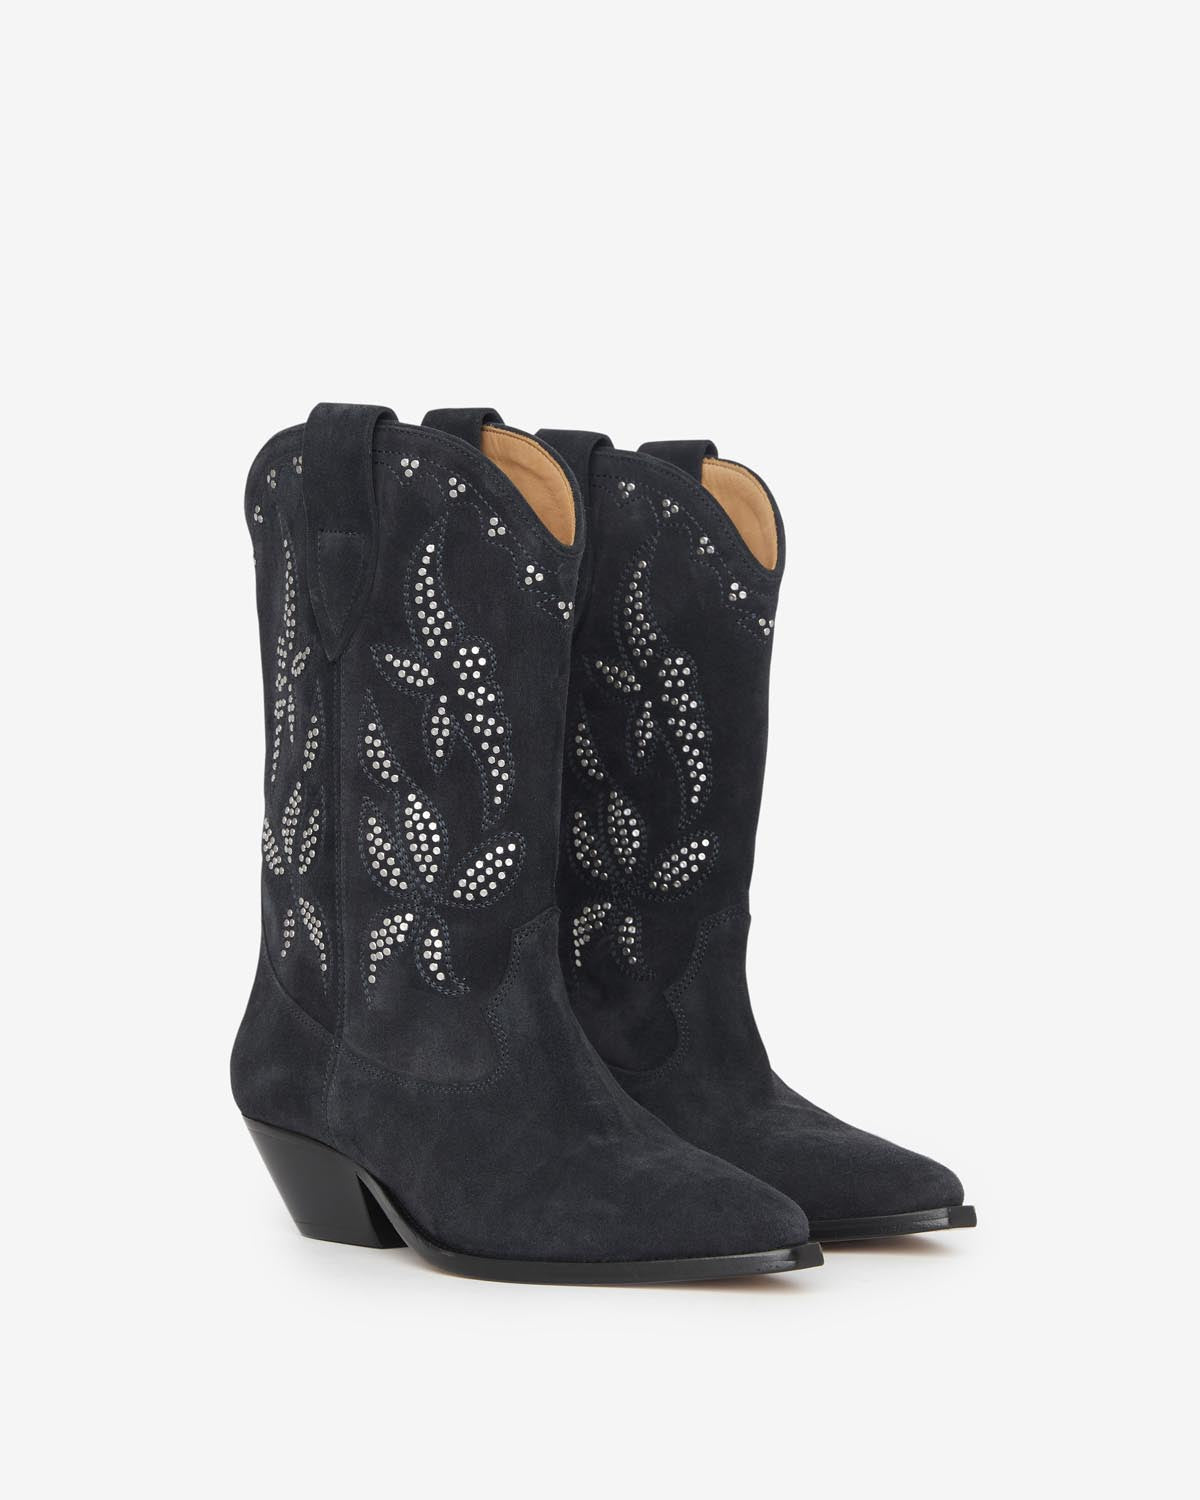 Boots duerto Woman Faded black-silver 4